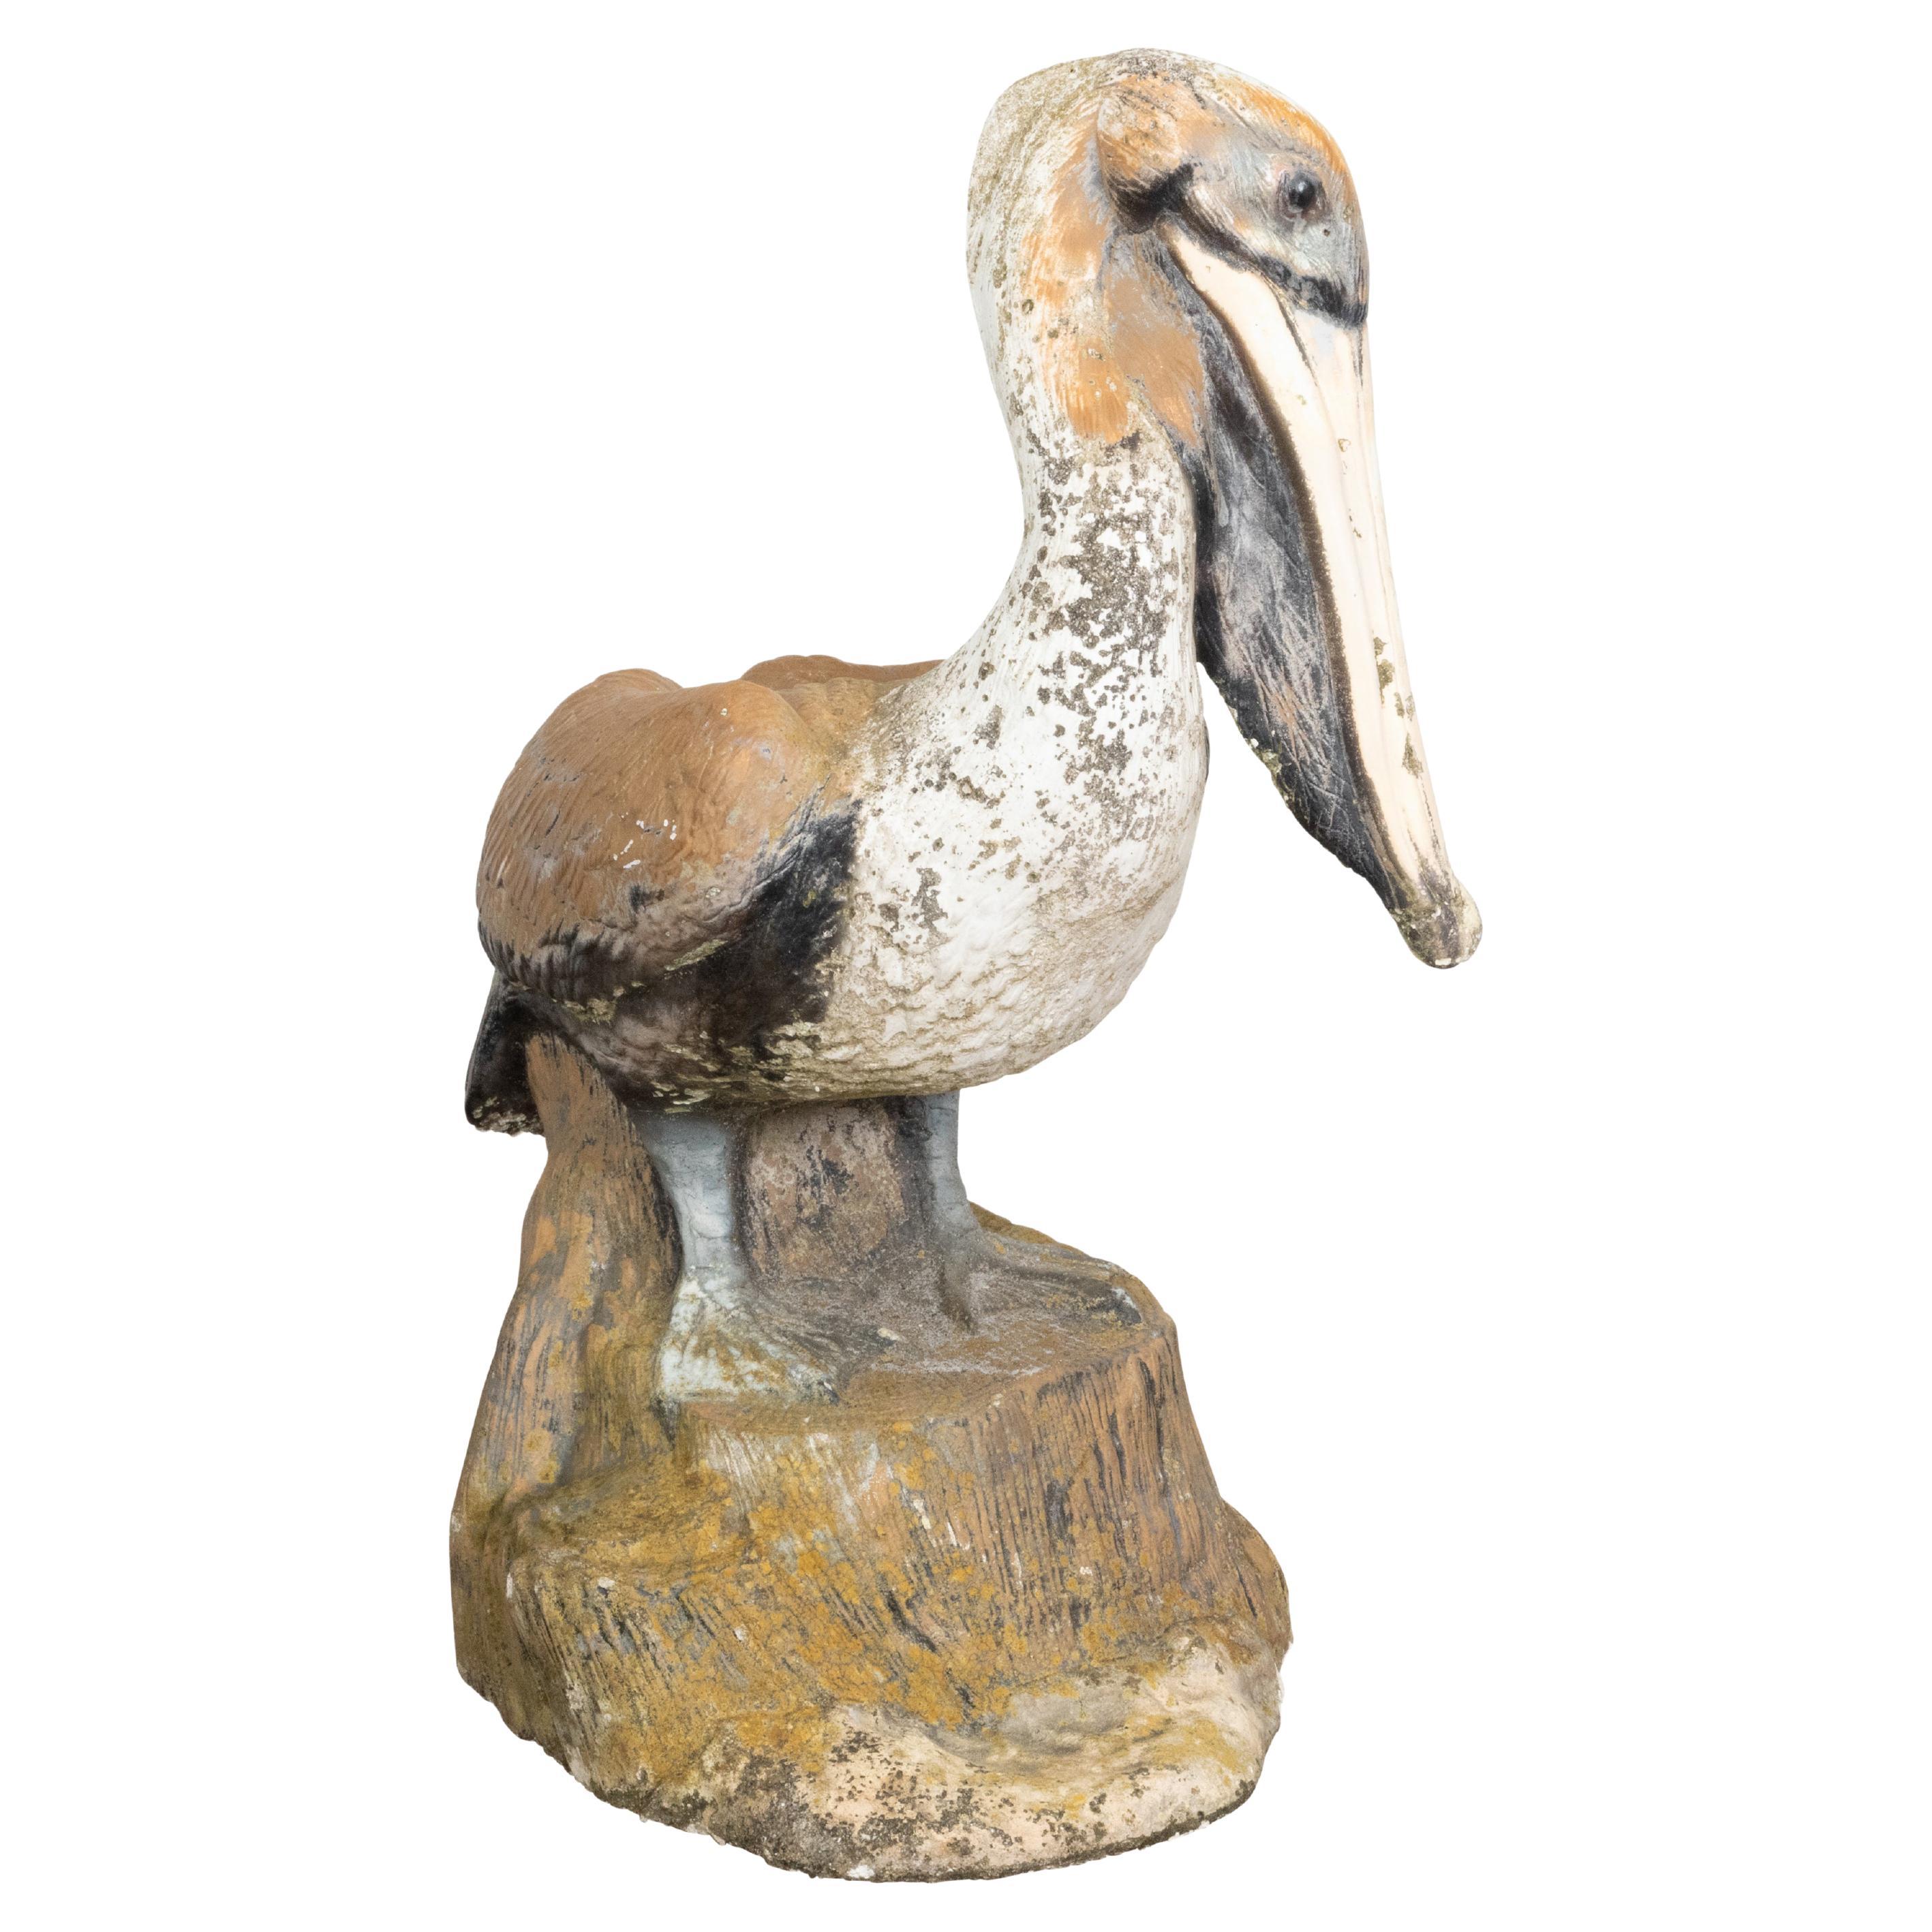 Midcentury Painted Concrete Pelican Sculpture on Base with Distressed Patina